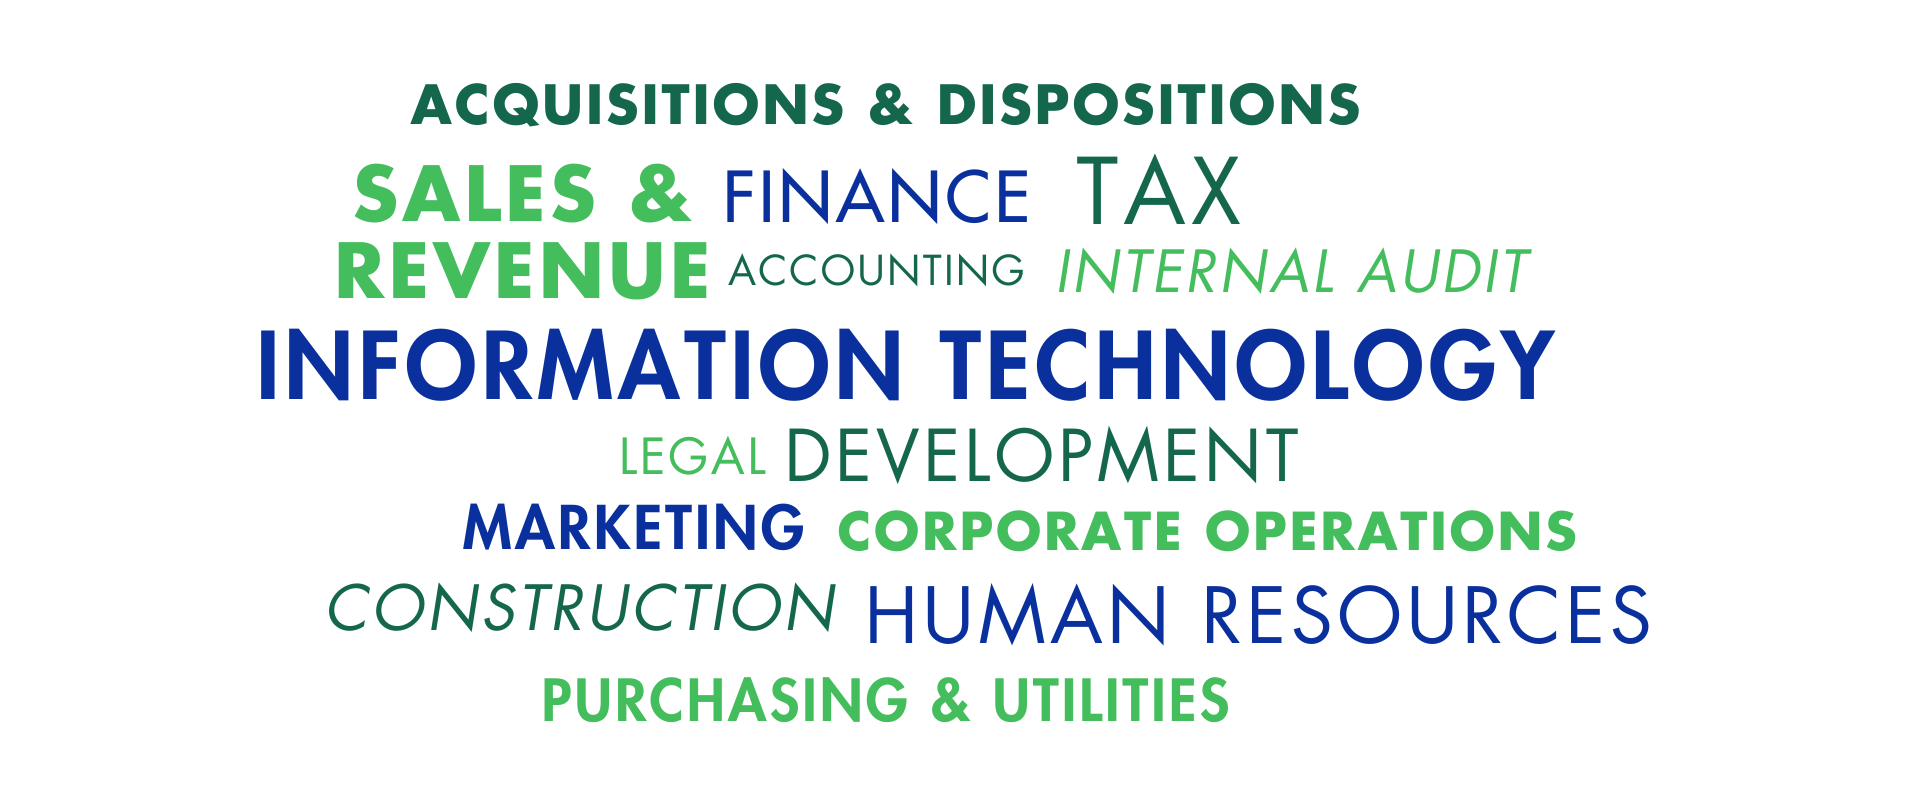 Word Cloud: Acquisitions & Dispositions, Sales & Revenue, Finance, Accounting, Internal Audit, Information Technology, Legal, Development, Marketing, Corporate Operations, Construction, Human Resources, Purchasing & Utilities